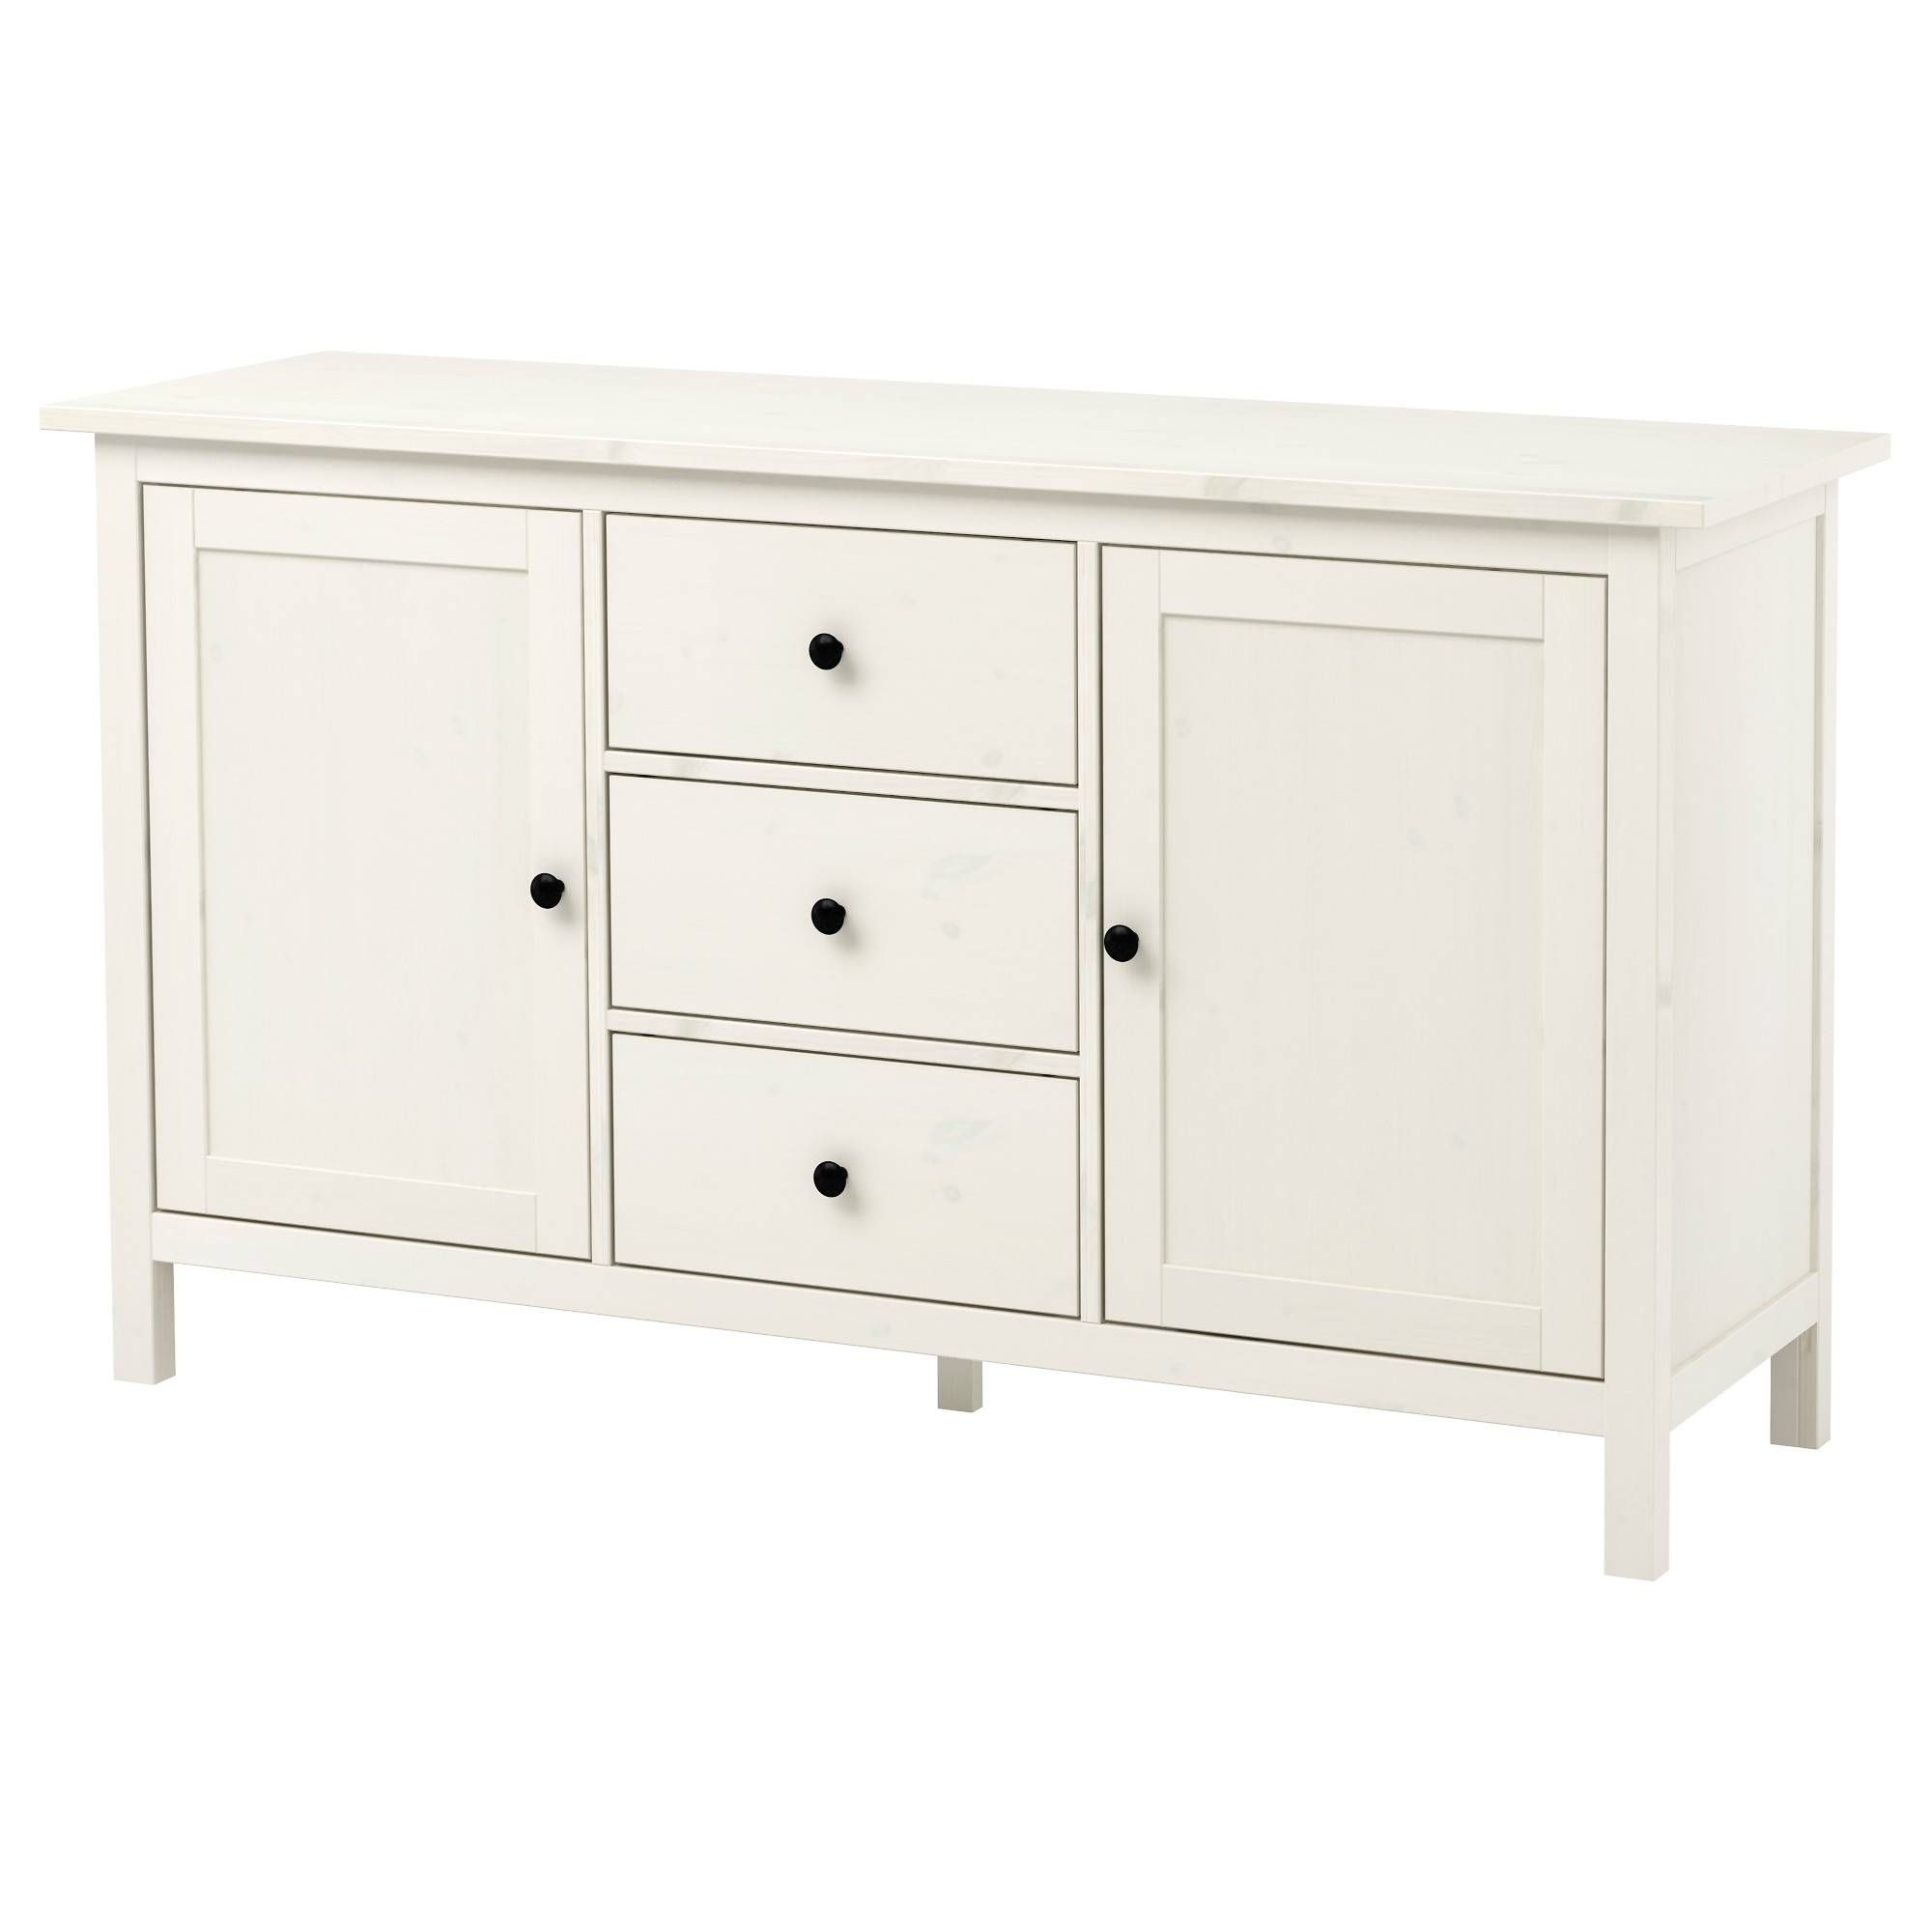 Hemnes Sideboard – White Stain – Ikea For Glass Door Buffet Sideboards (View 6 of 15)